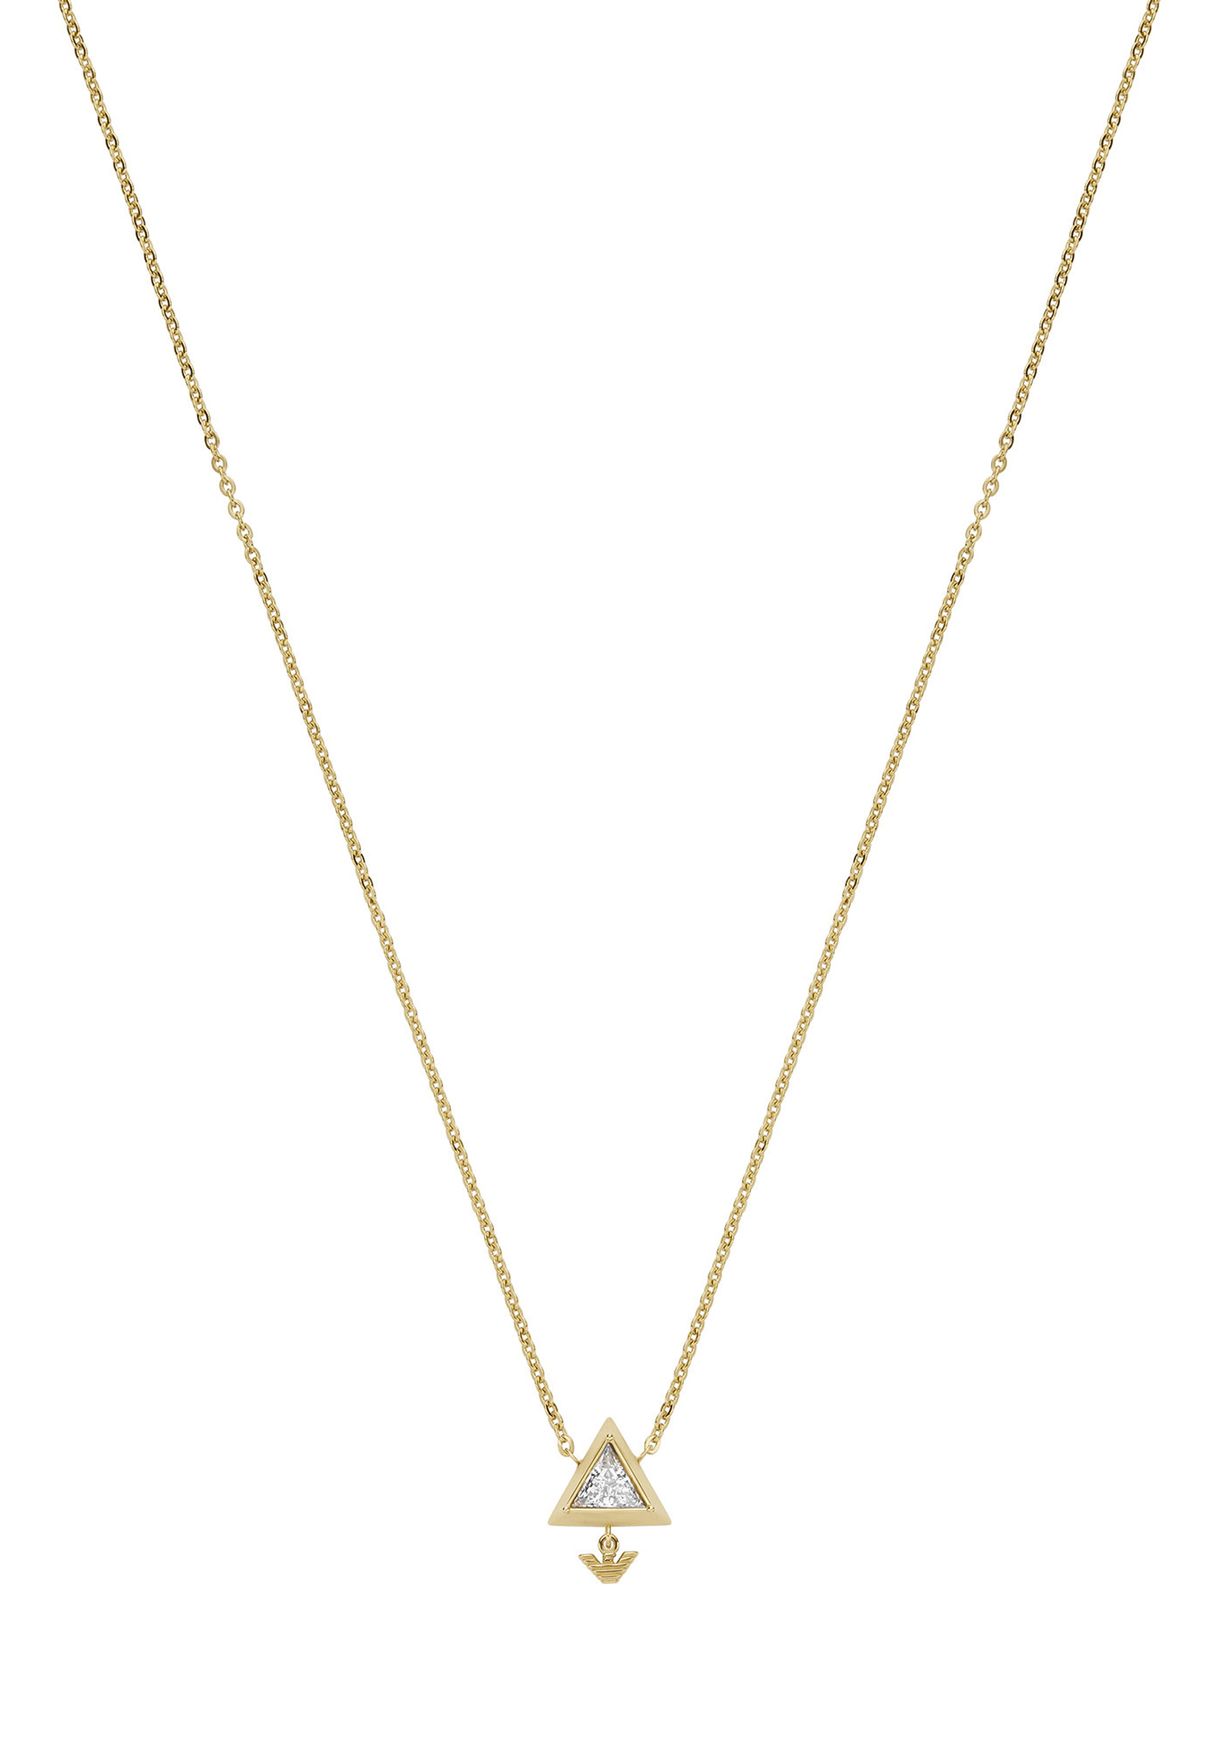 Egs2898710 Choker Necklace